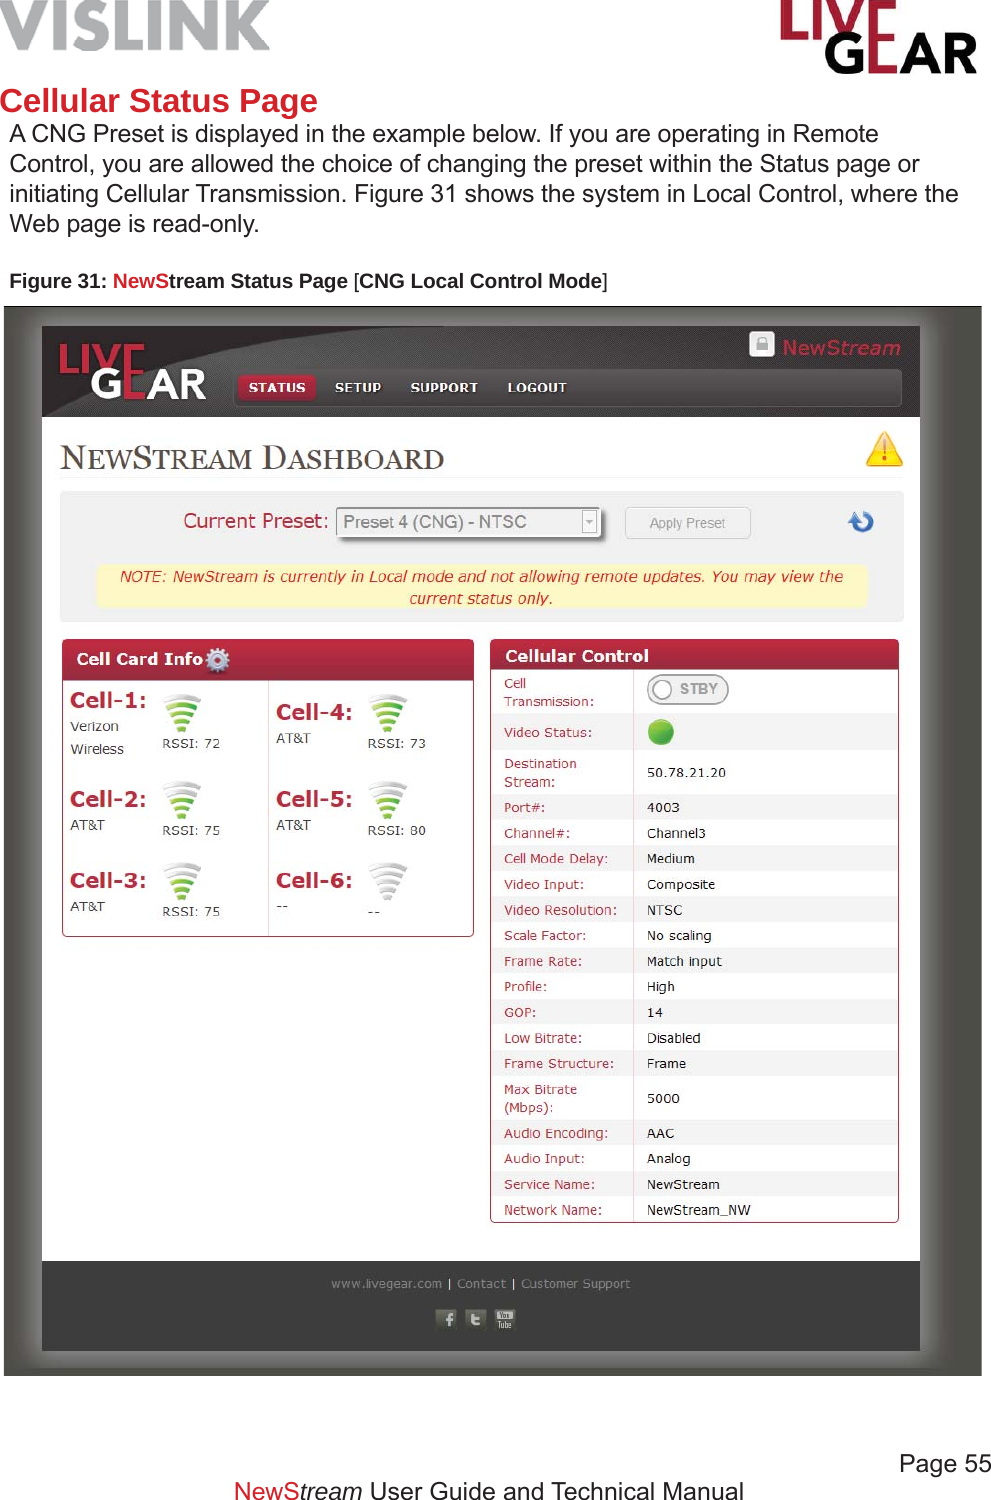             Page 55NewStream User Guide and Technical ManualFigure 31: NewStream Status Page [CNG Local Control Mode]Cellular Status PageA CNG Preset is displayed in the example below. If you are operating in Remote Control, you are allowed the choice of changing the preset within the Status page or initiating Cellular Transmission. Figure 31 shows the system in Local Control, where the Web page is read-only.